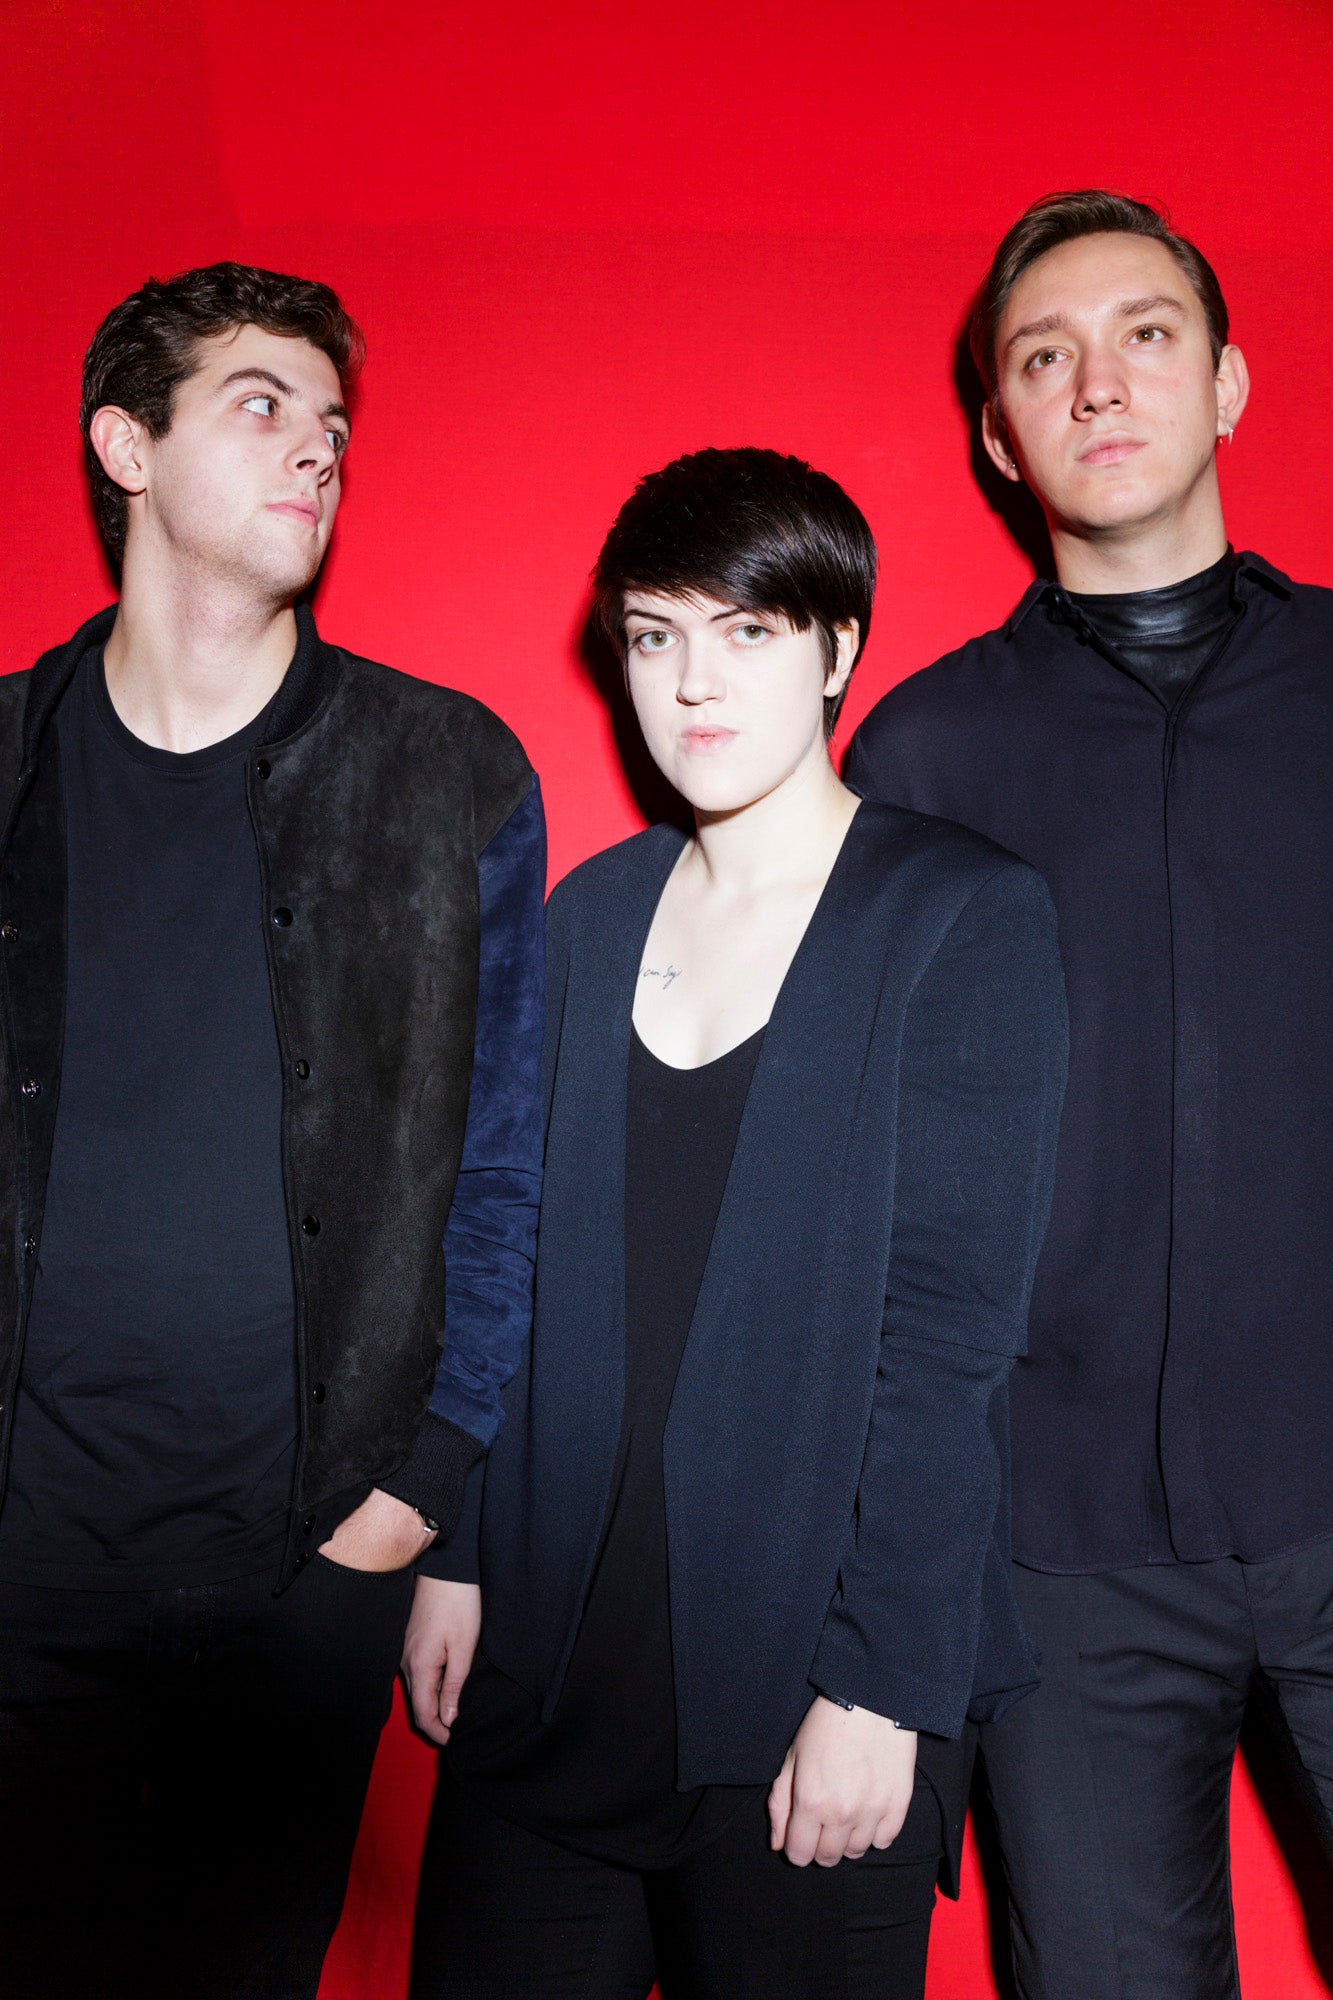 Mood Music The Xx Are Looking On The Glossier Side Of Life As They Begin A Tour The